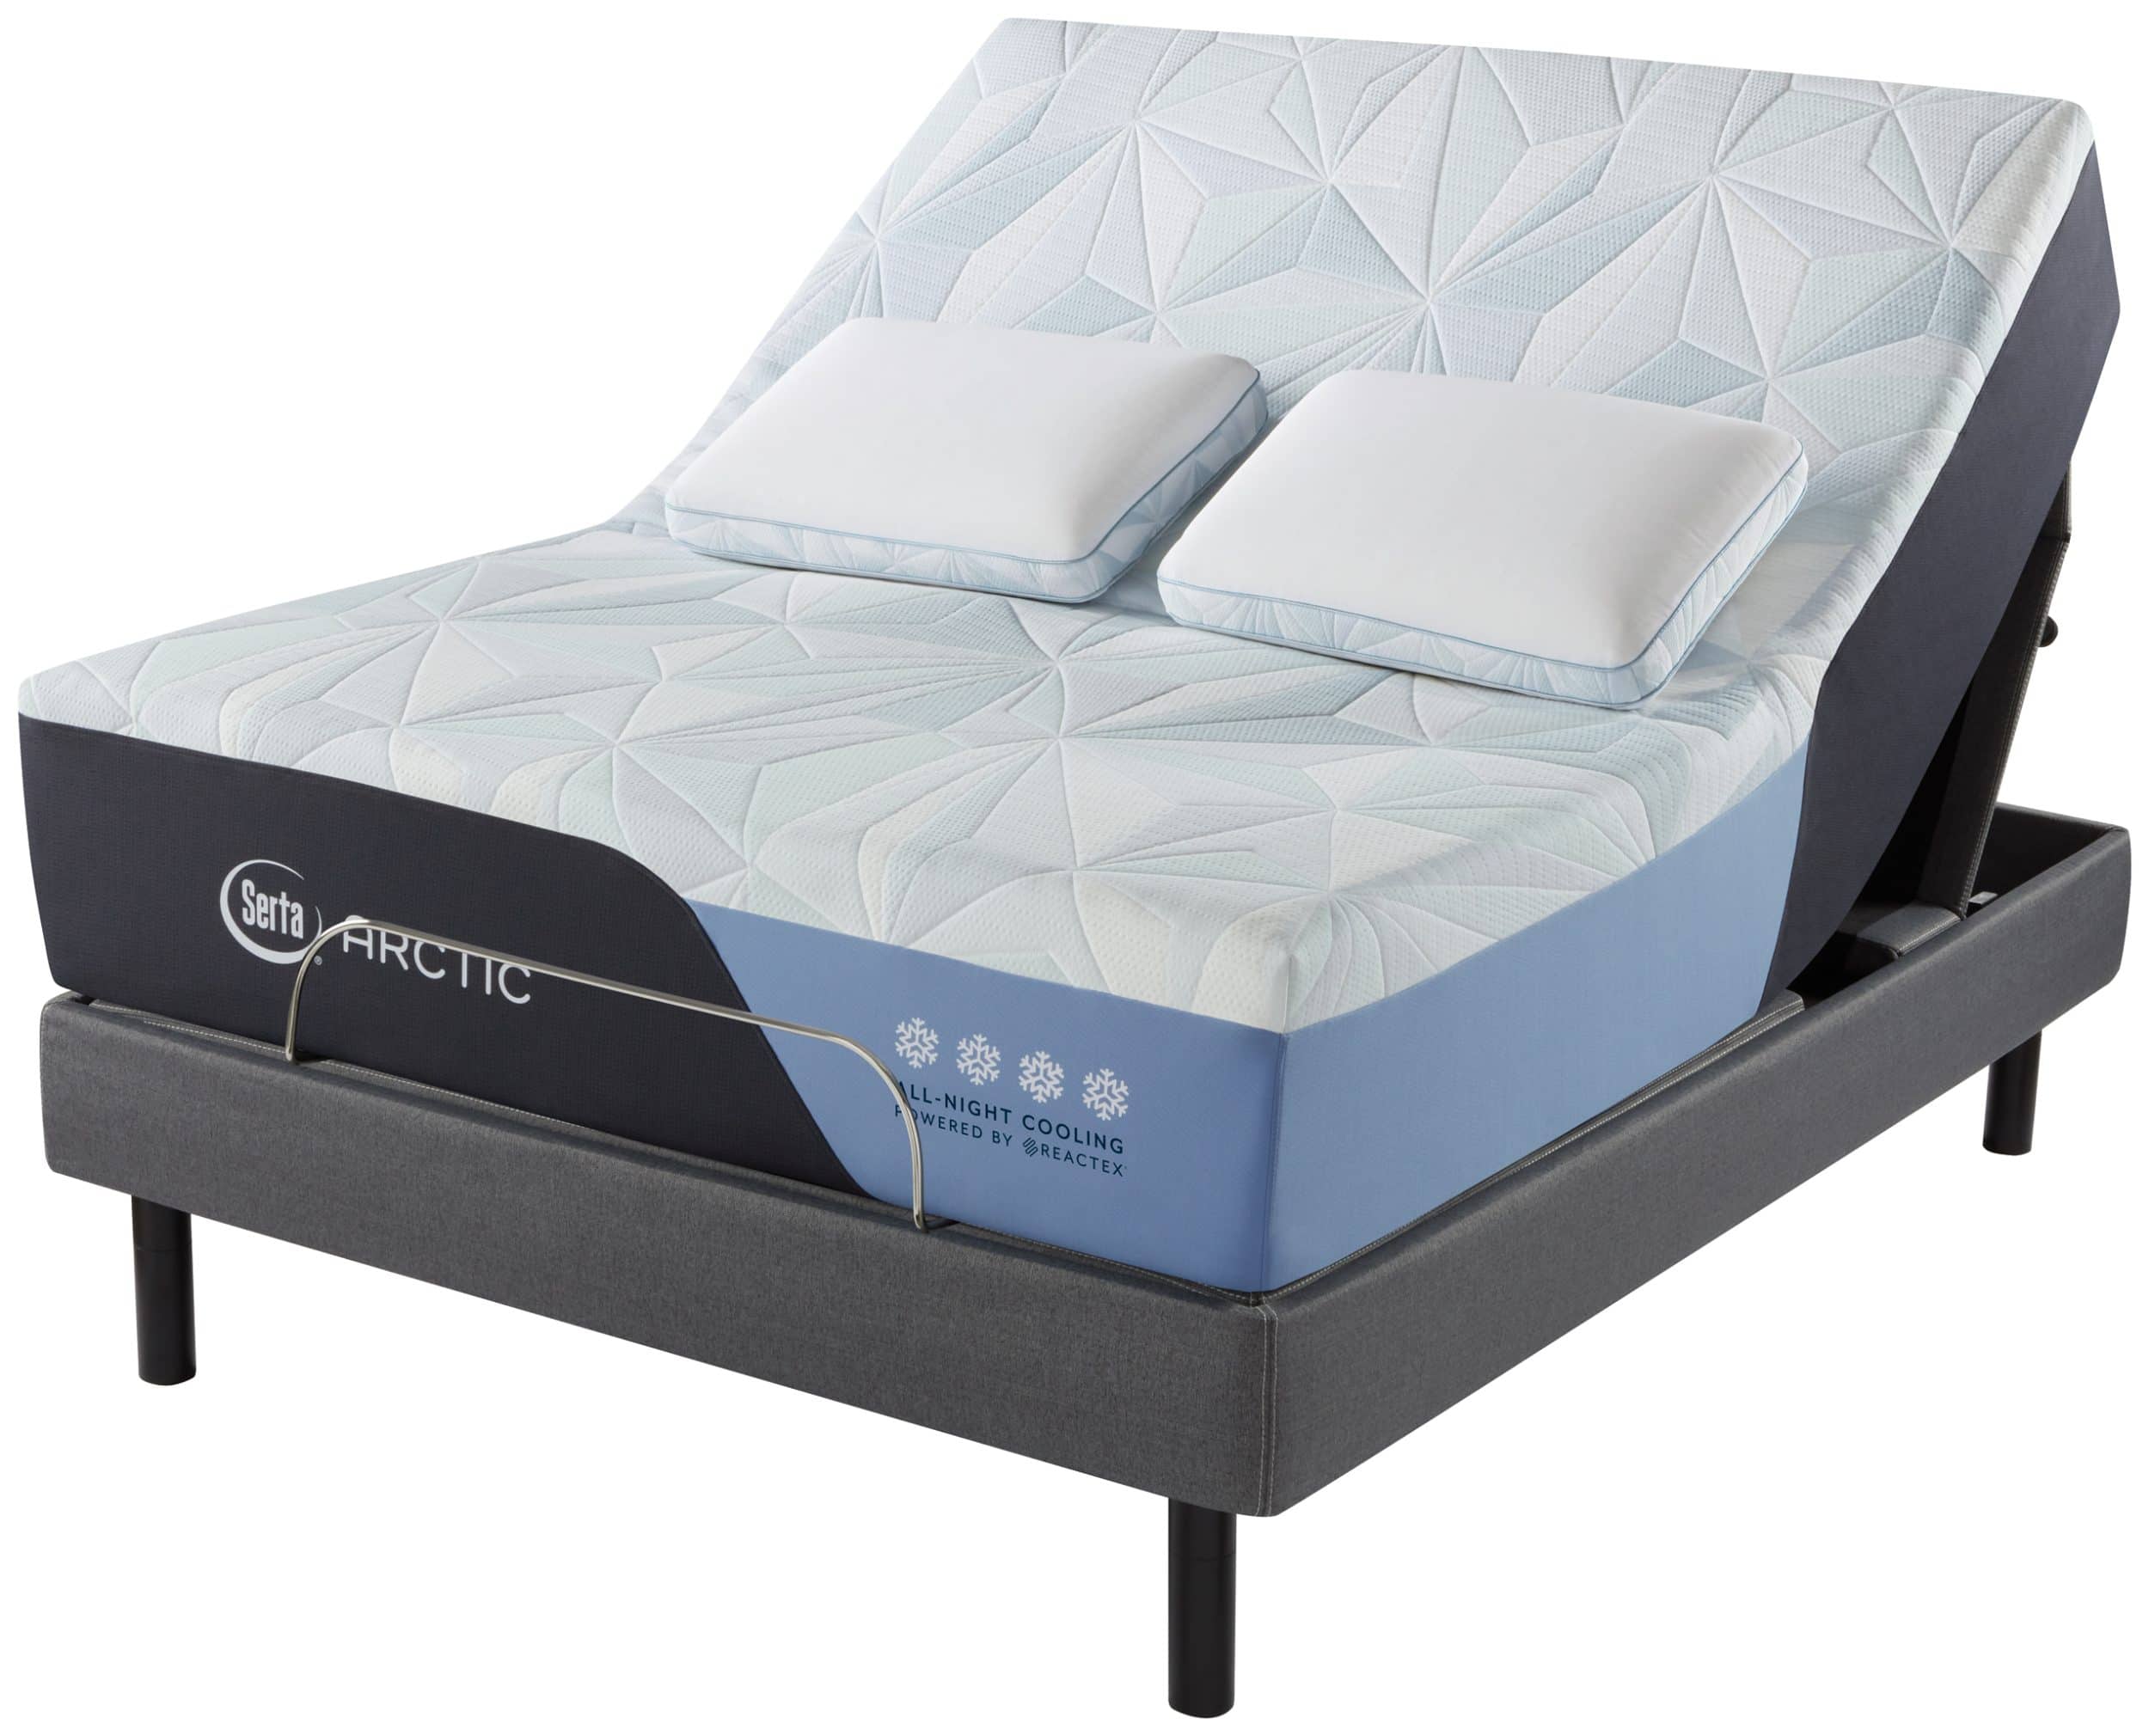 Bedframe with mattress that is arched. Serta Arctic